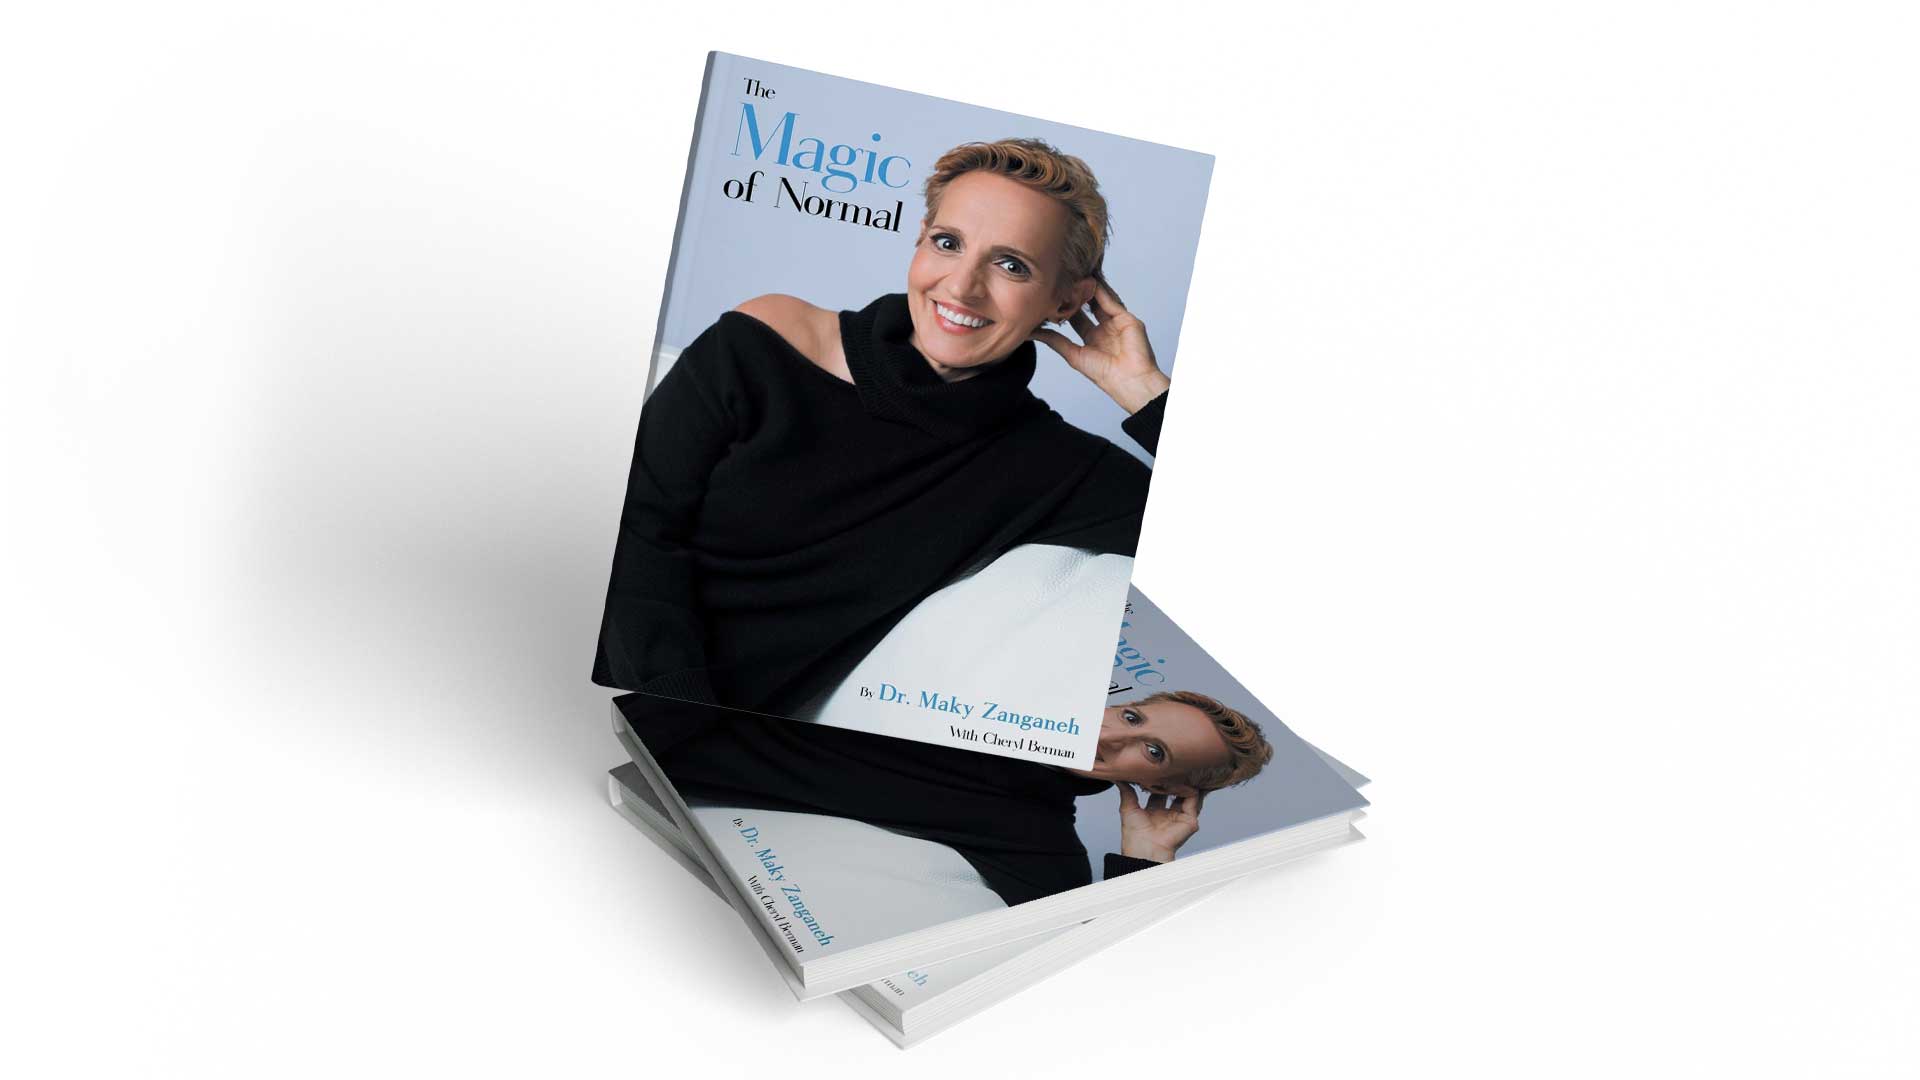 Dr. Maky Zanganeh Launches Personal Memoir, The Magic of Normal, to Honor February Cancer Survivor Month